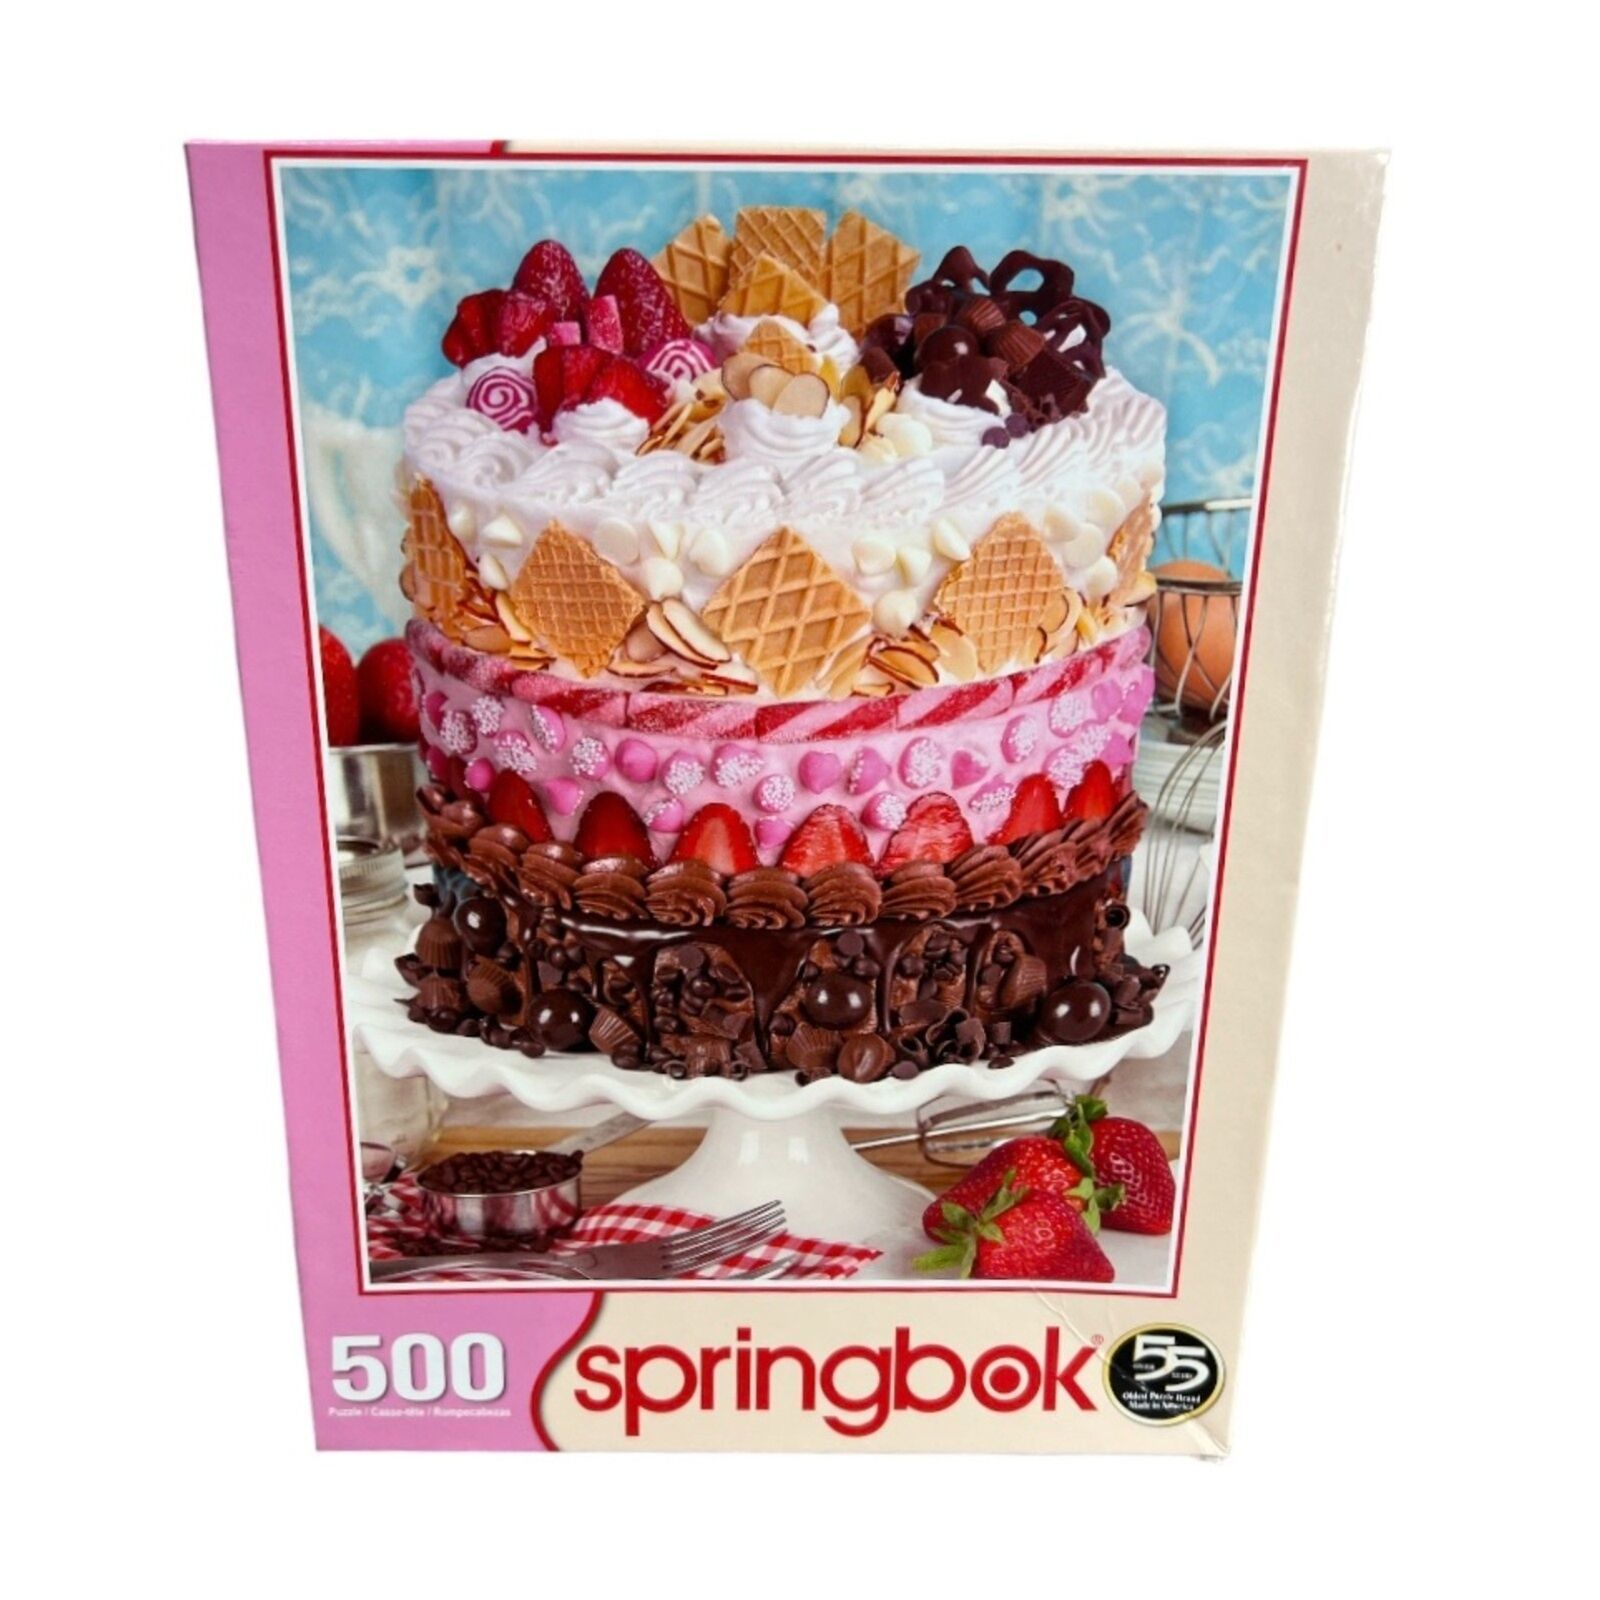 Springbok Jigsaw Puzzle 500 piece Desert Icing on the cake family game  - $13.86